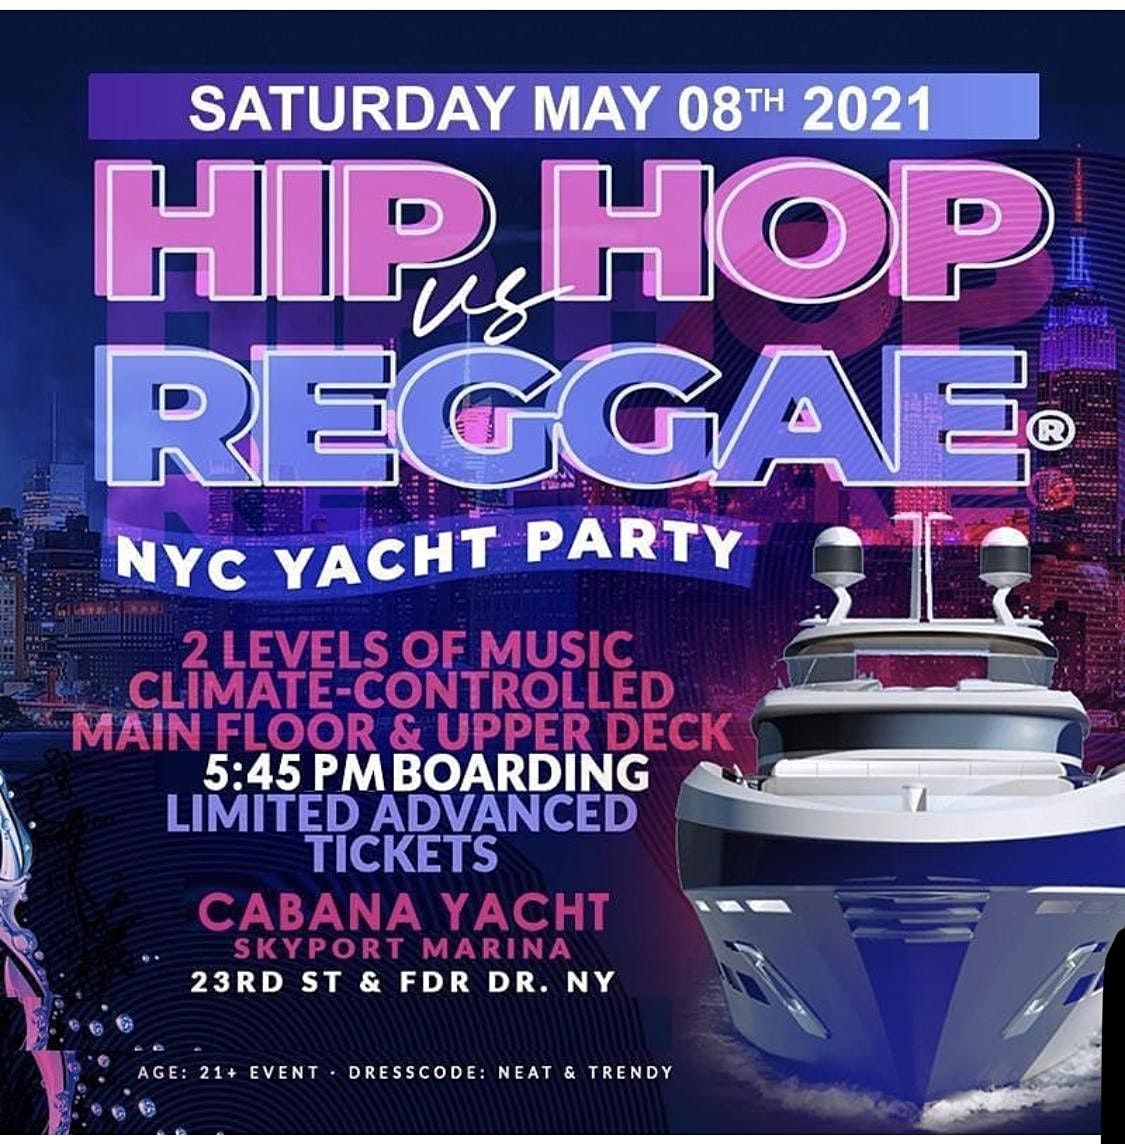 MIDNIGHT YACHT PARTY NYC! Fri., August 13th